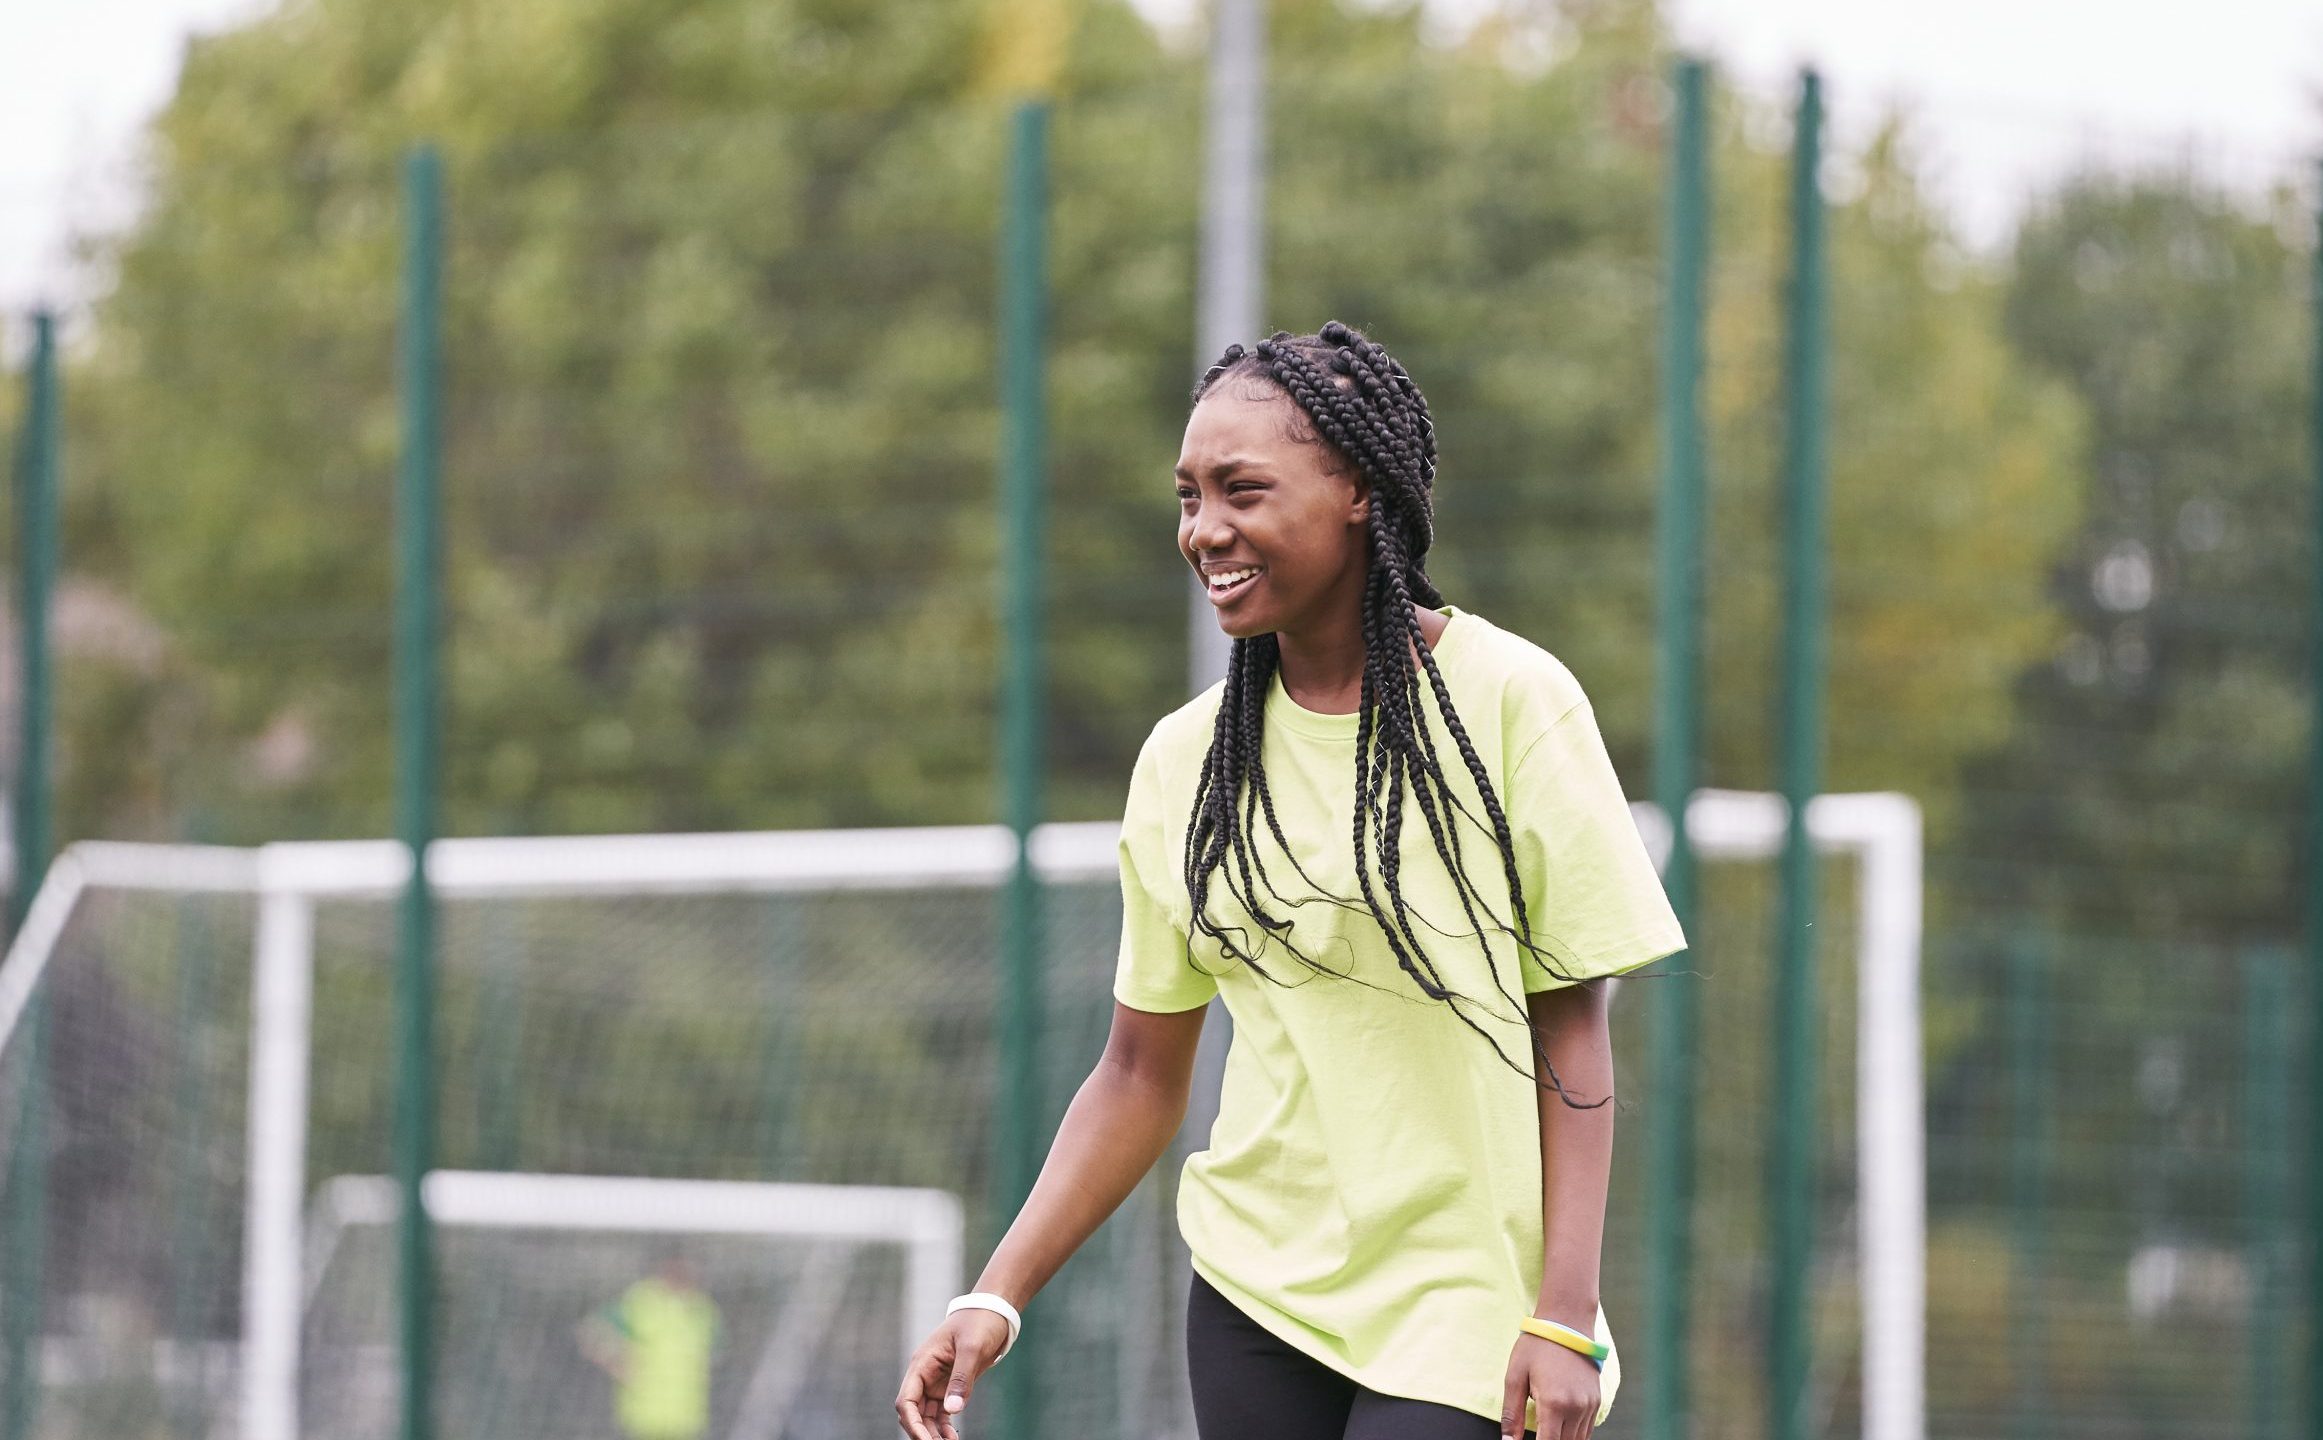 A young black teenager with braided hair laughing while playing football